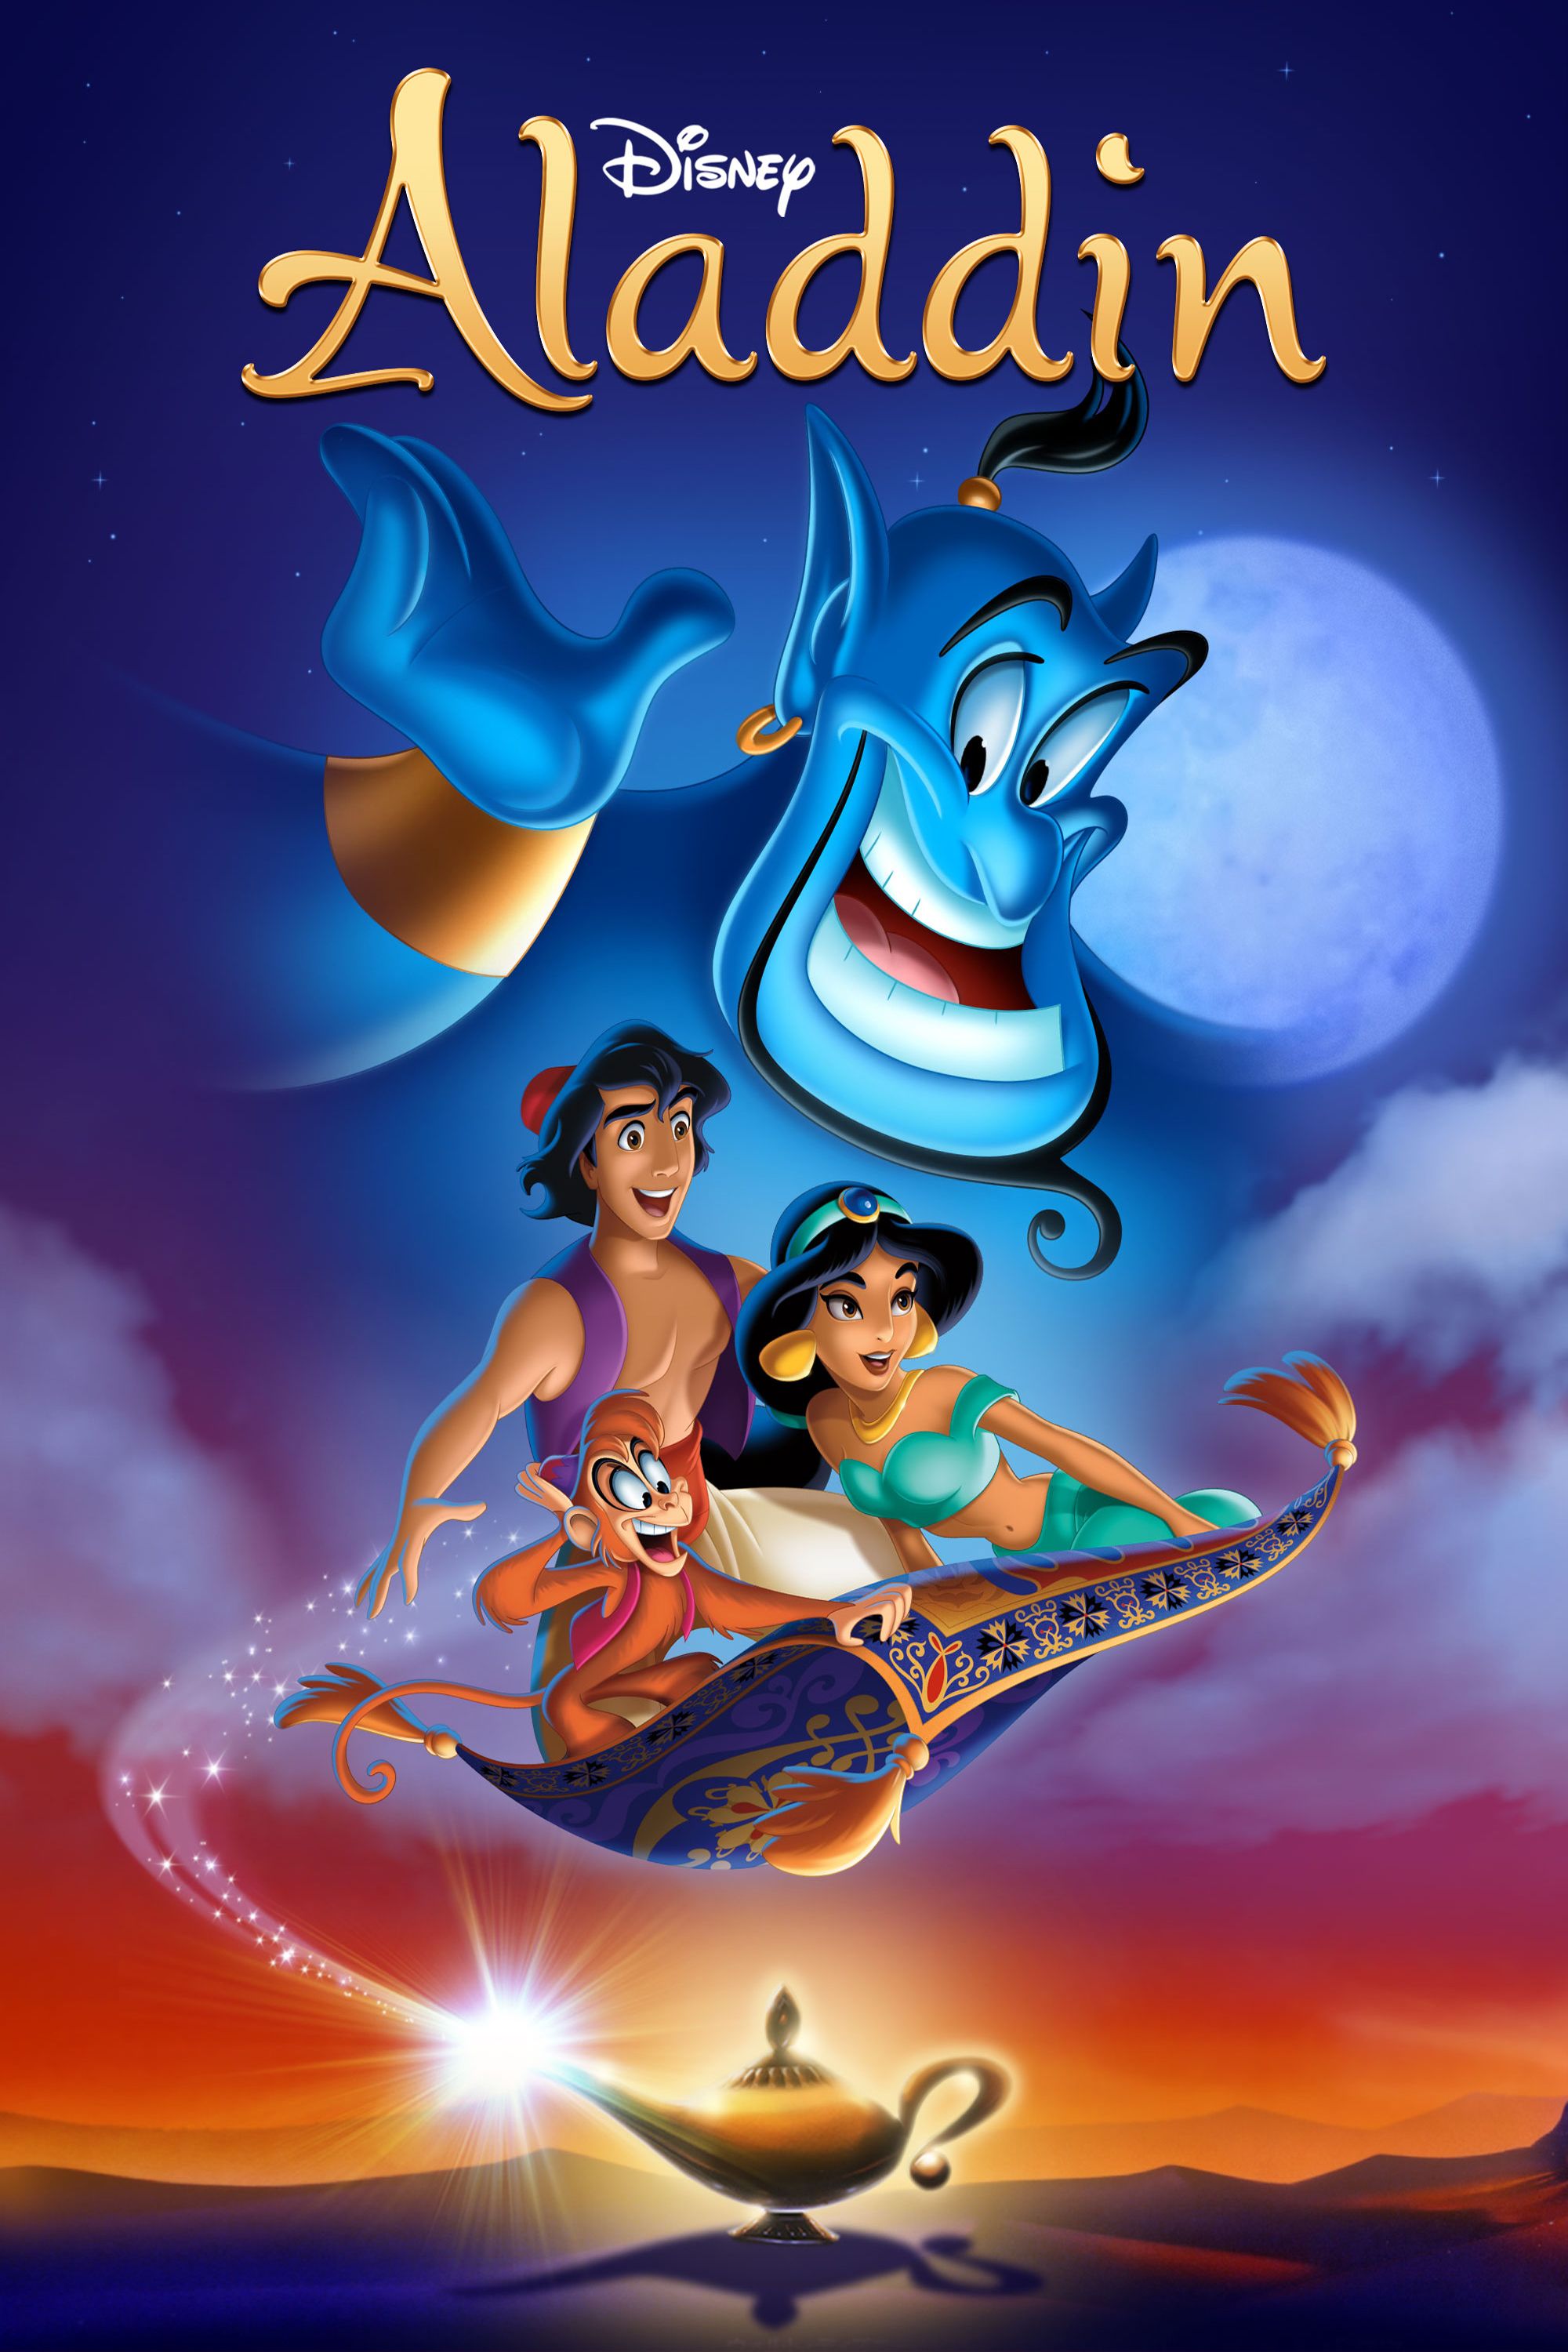 Aladdin who came on the flying carpet cartoon story become true